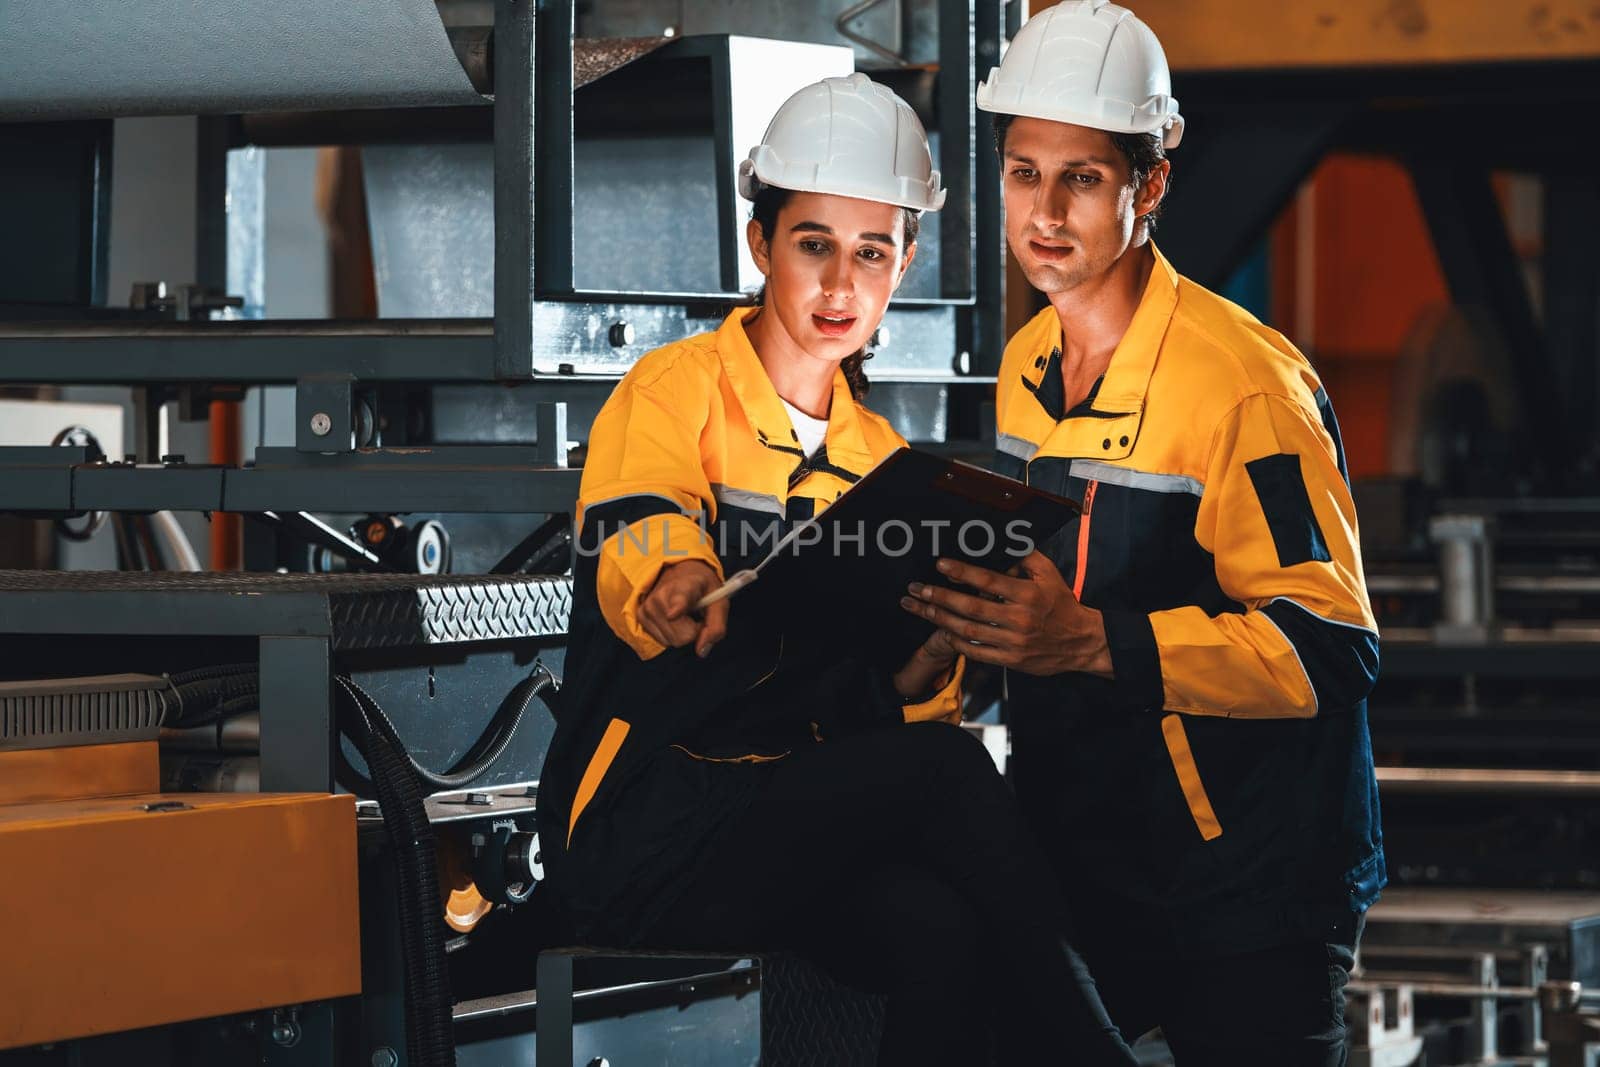 Professional quality control inspector conduct safety inspection on steel machinery and manufacturing process. Factory engineer or operator make optimization in heavy industry facility. Exemplifying